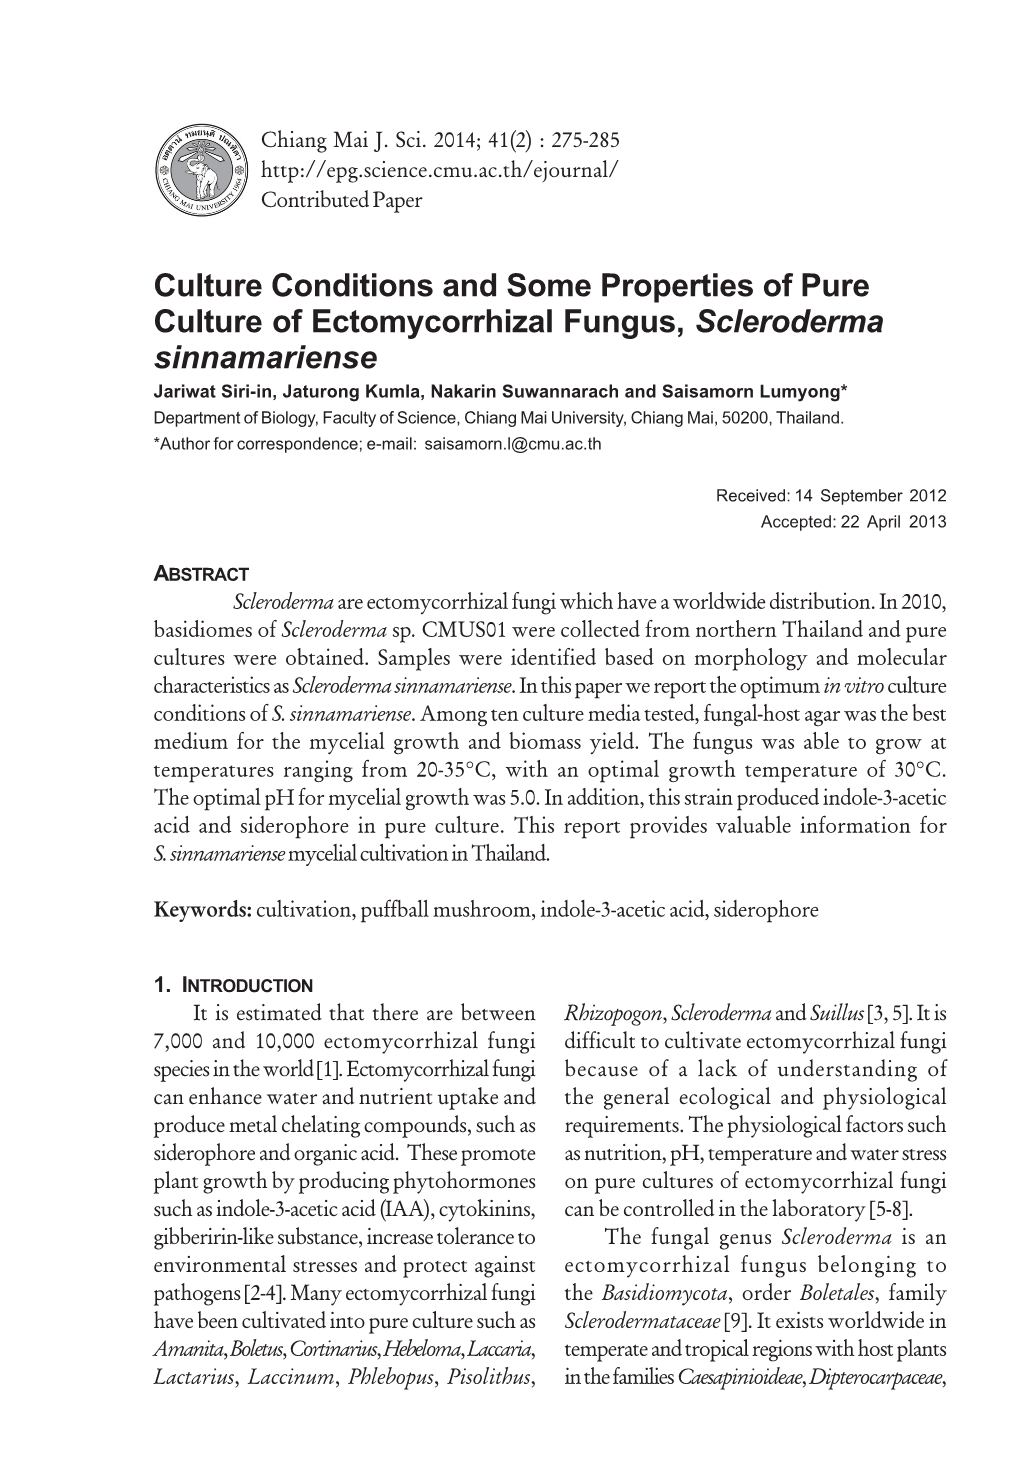 Culture Conditions and Some Properties of Pure